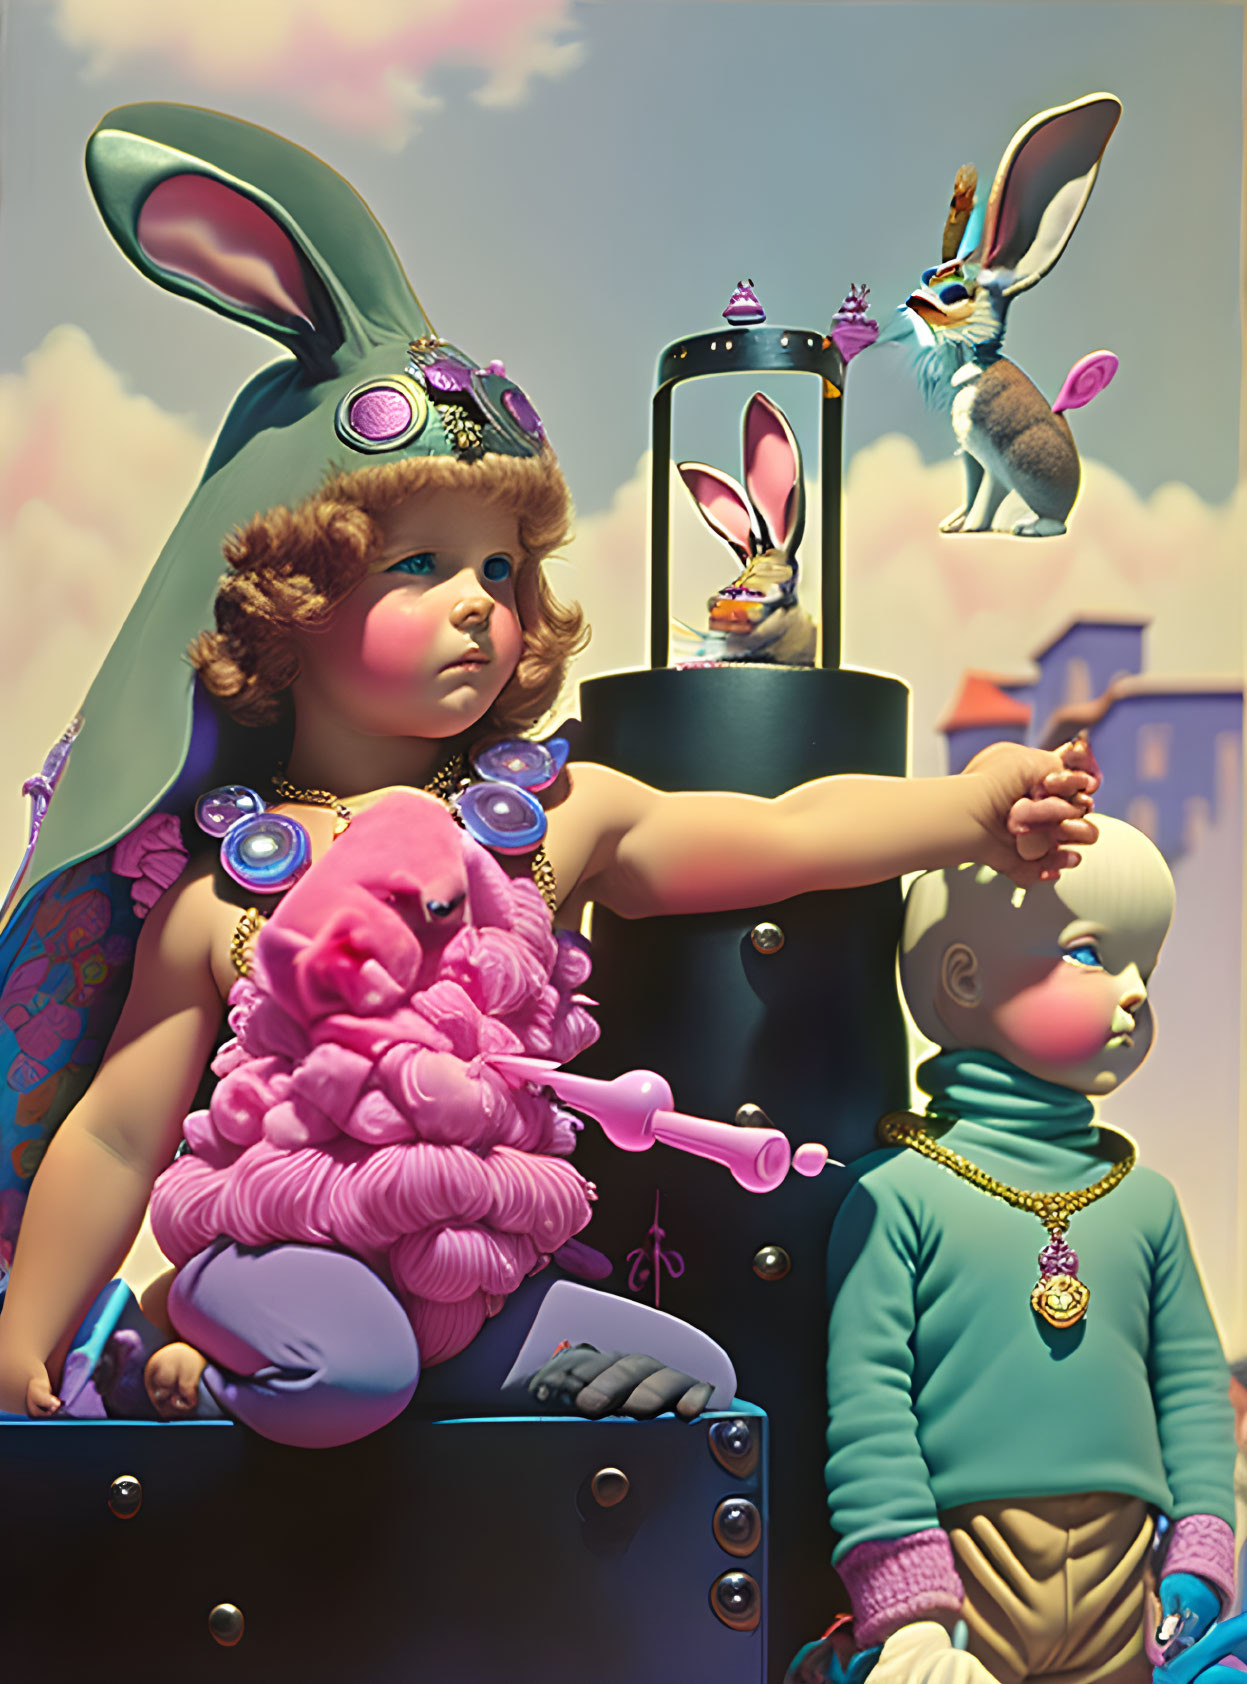 Child with rabbit-ear hat, sheep creature, doll in surreal jewelry scene